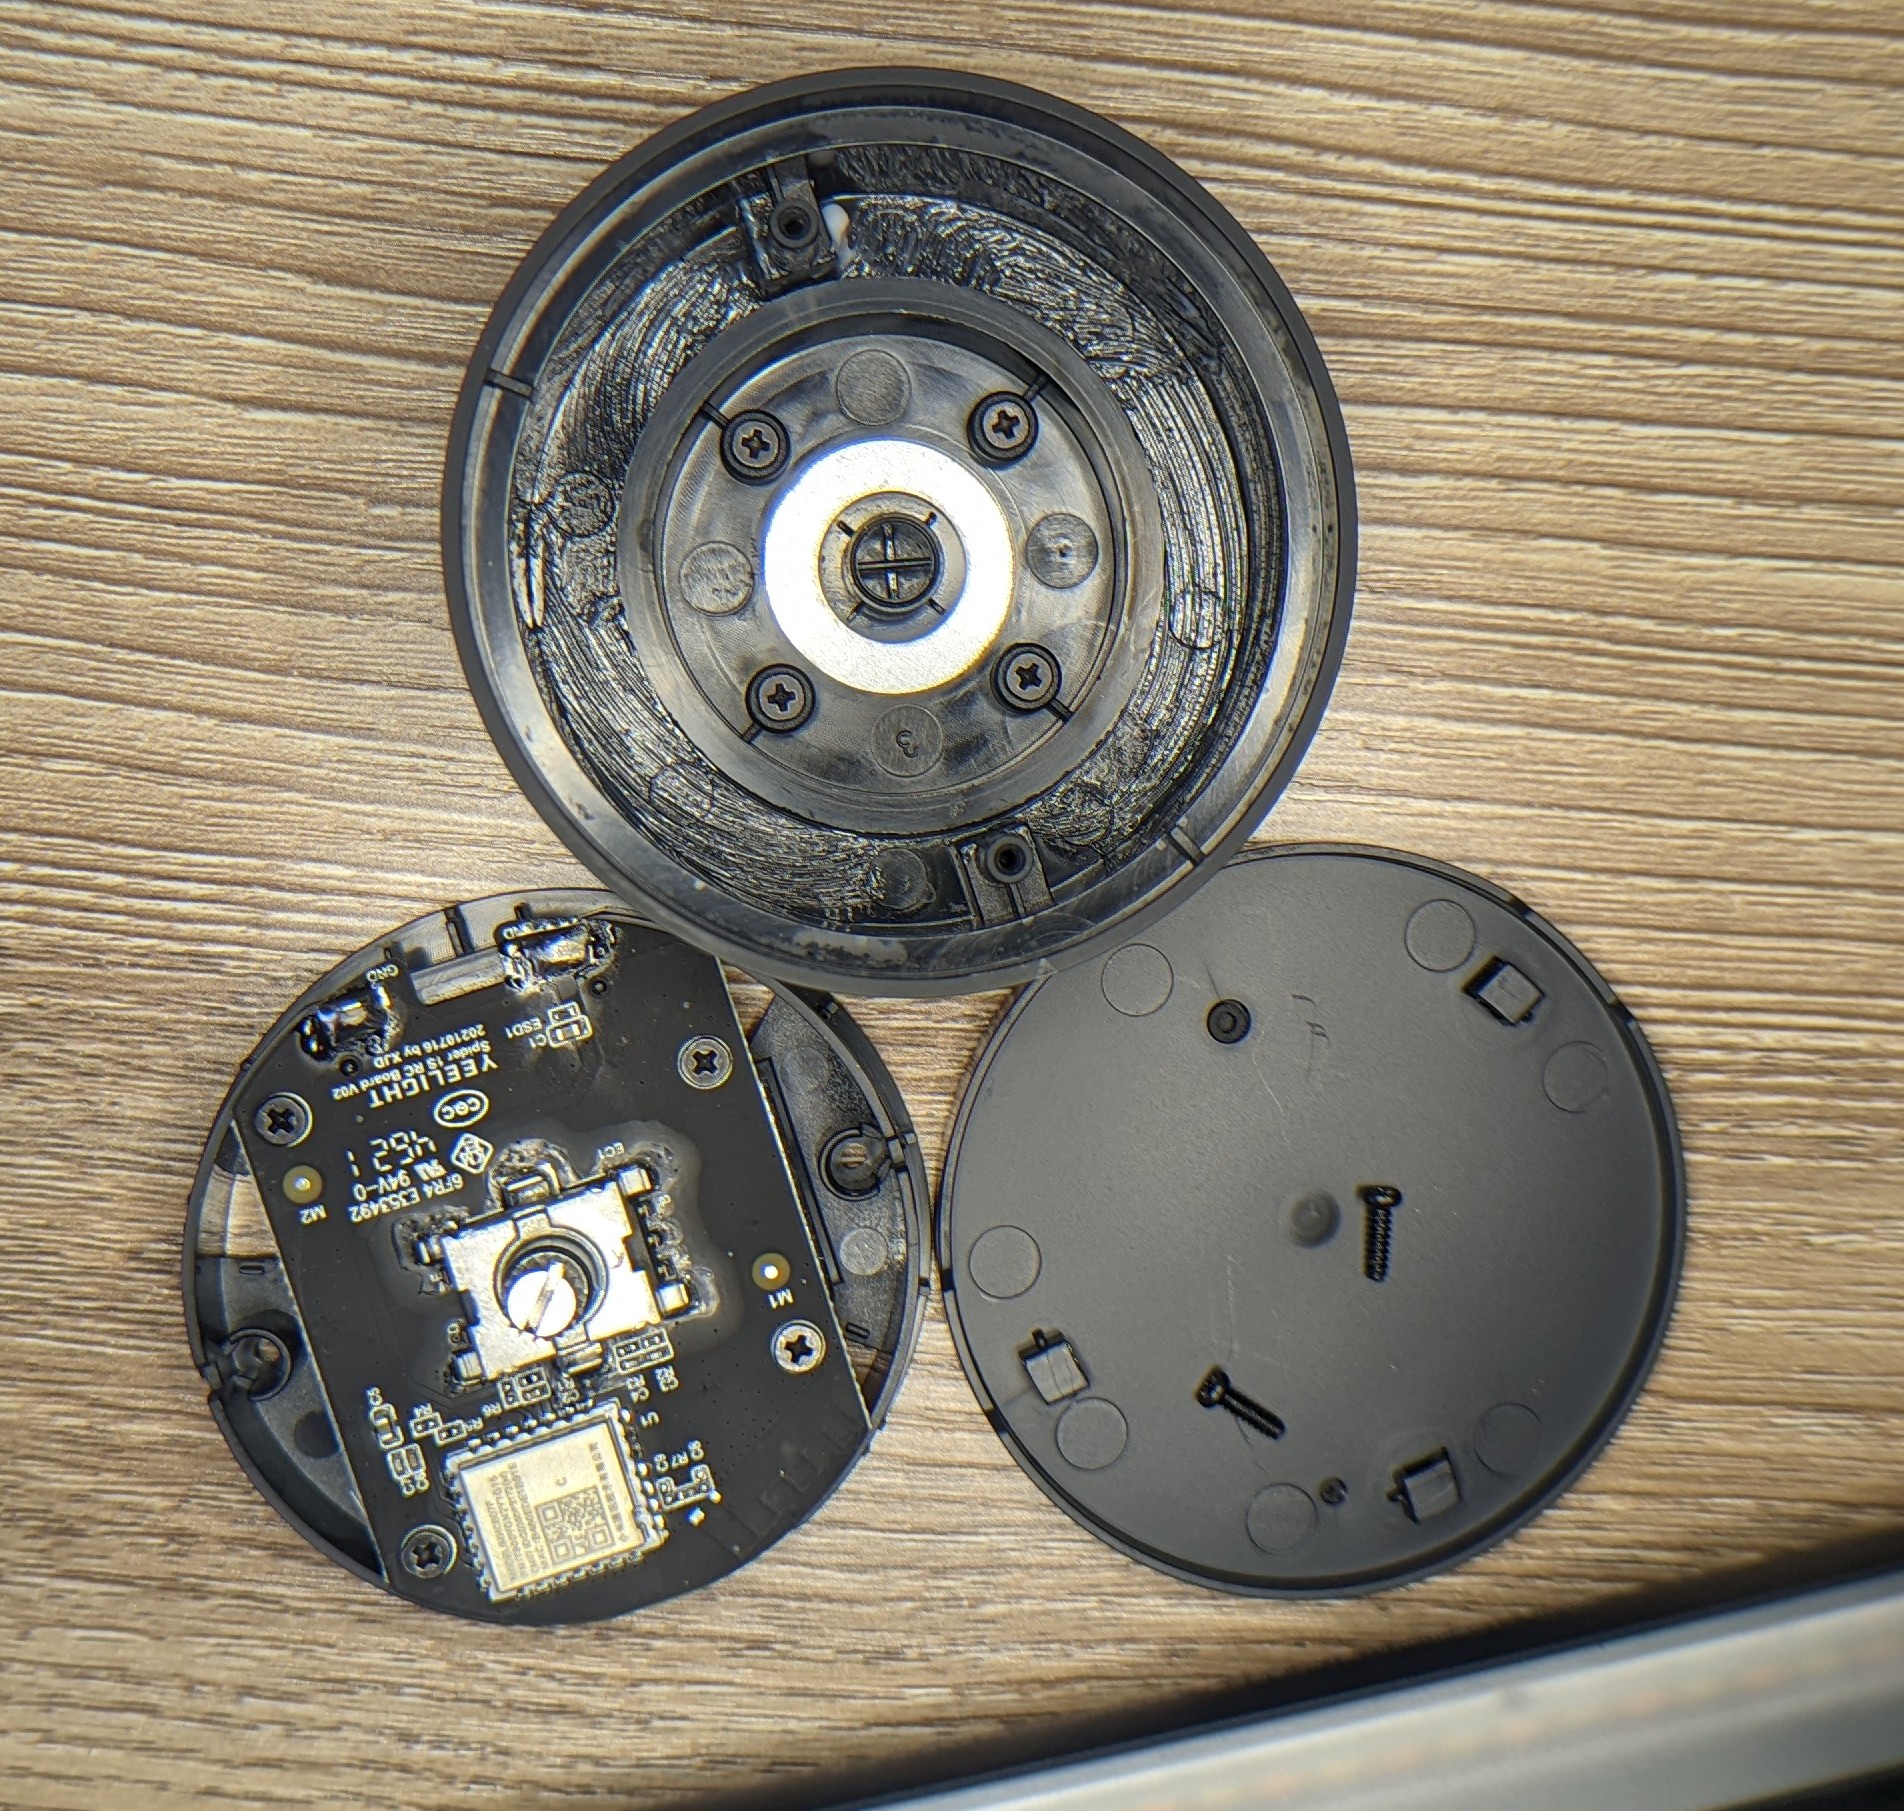 Photo of the remote broken down into it's primary components; the PCB is visible.